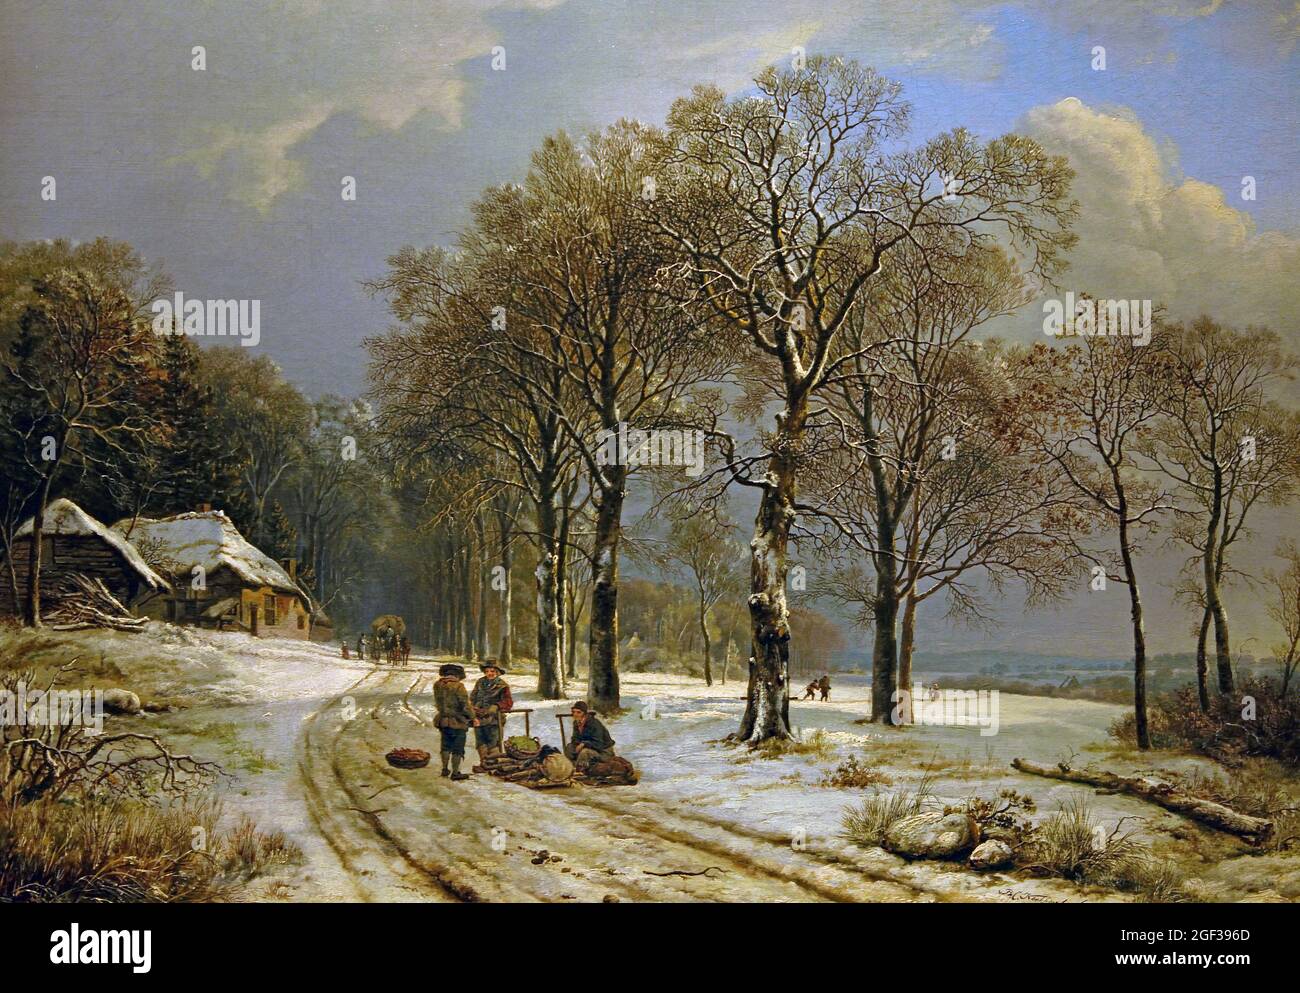 Winter, landscape, Barend Cornelis Koekkoek, 1835 - 1838 Dutch, Netherlands oil on canvas, 62 × 75 Koekkoek chose a rolling landscape in Gelderland of the German area of the Lower Rhine. A calm scene, with men pausing by a sled laden with deadwood and vegetables. tranquil nature on a winter's day, a world covered with the purity of snow Stock Photo